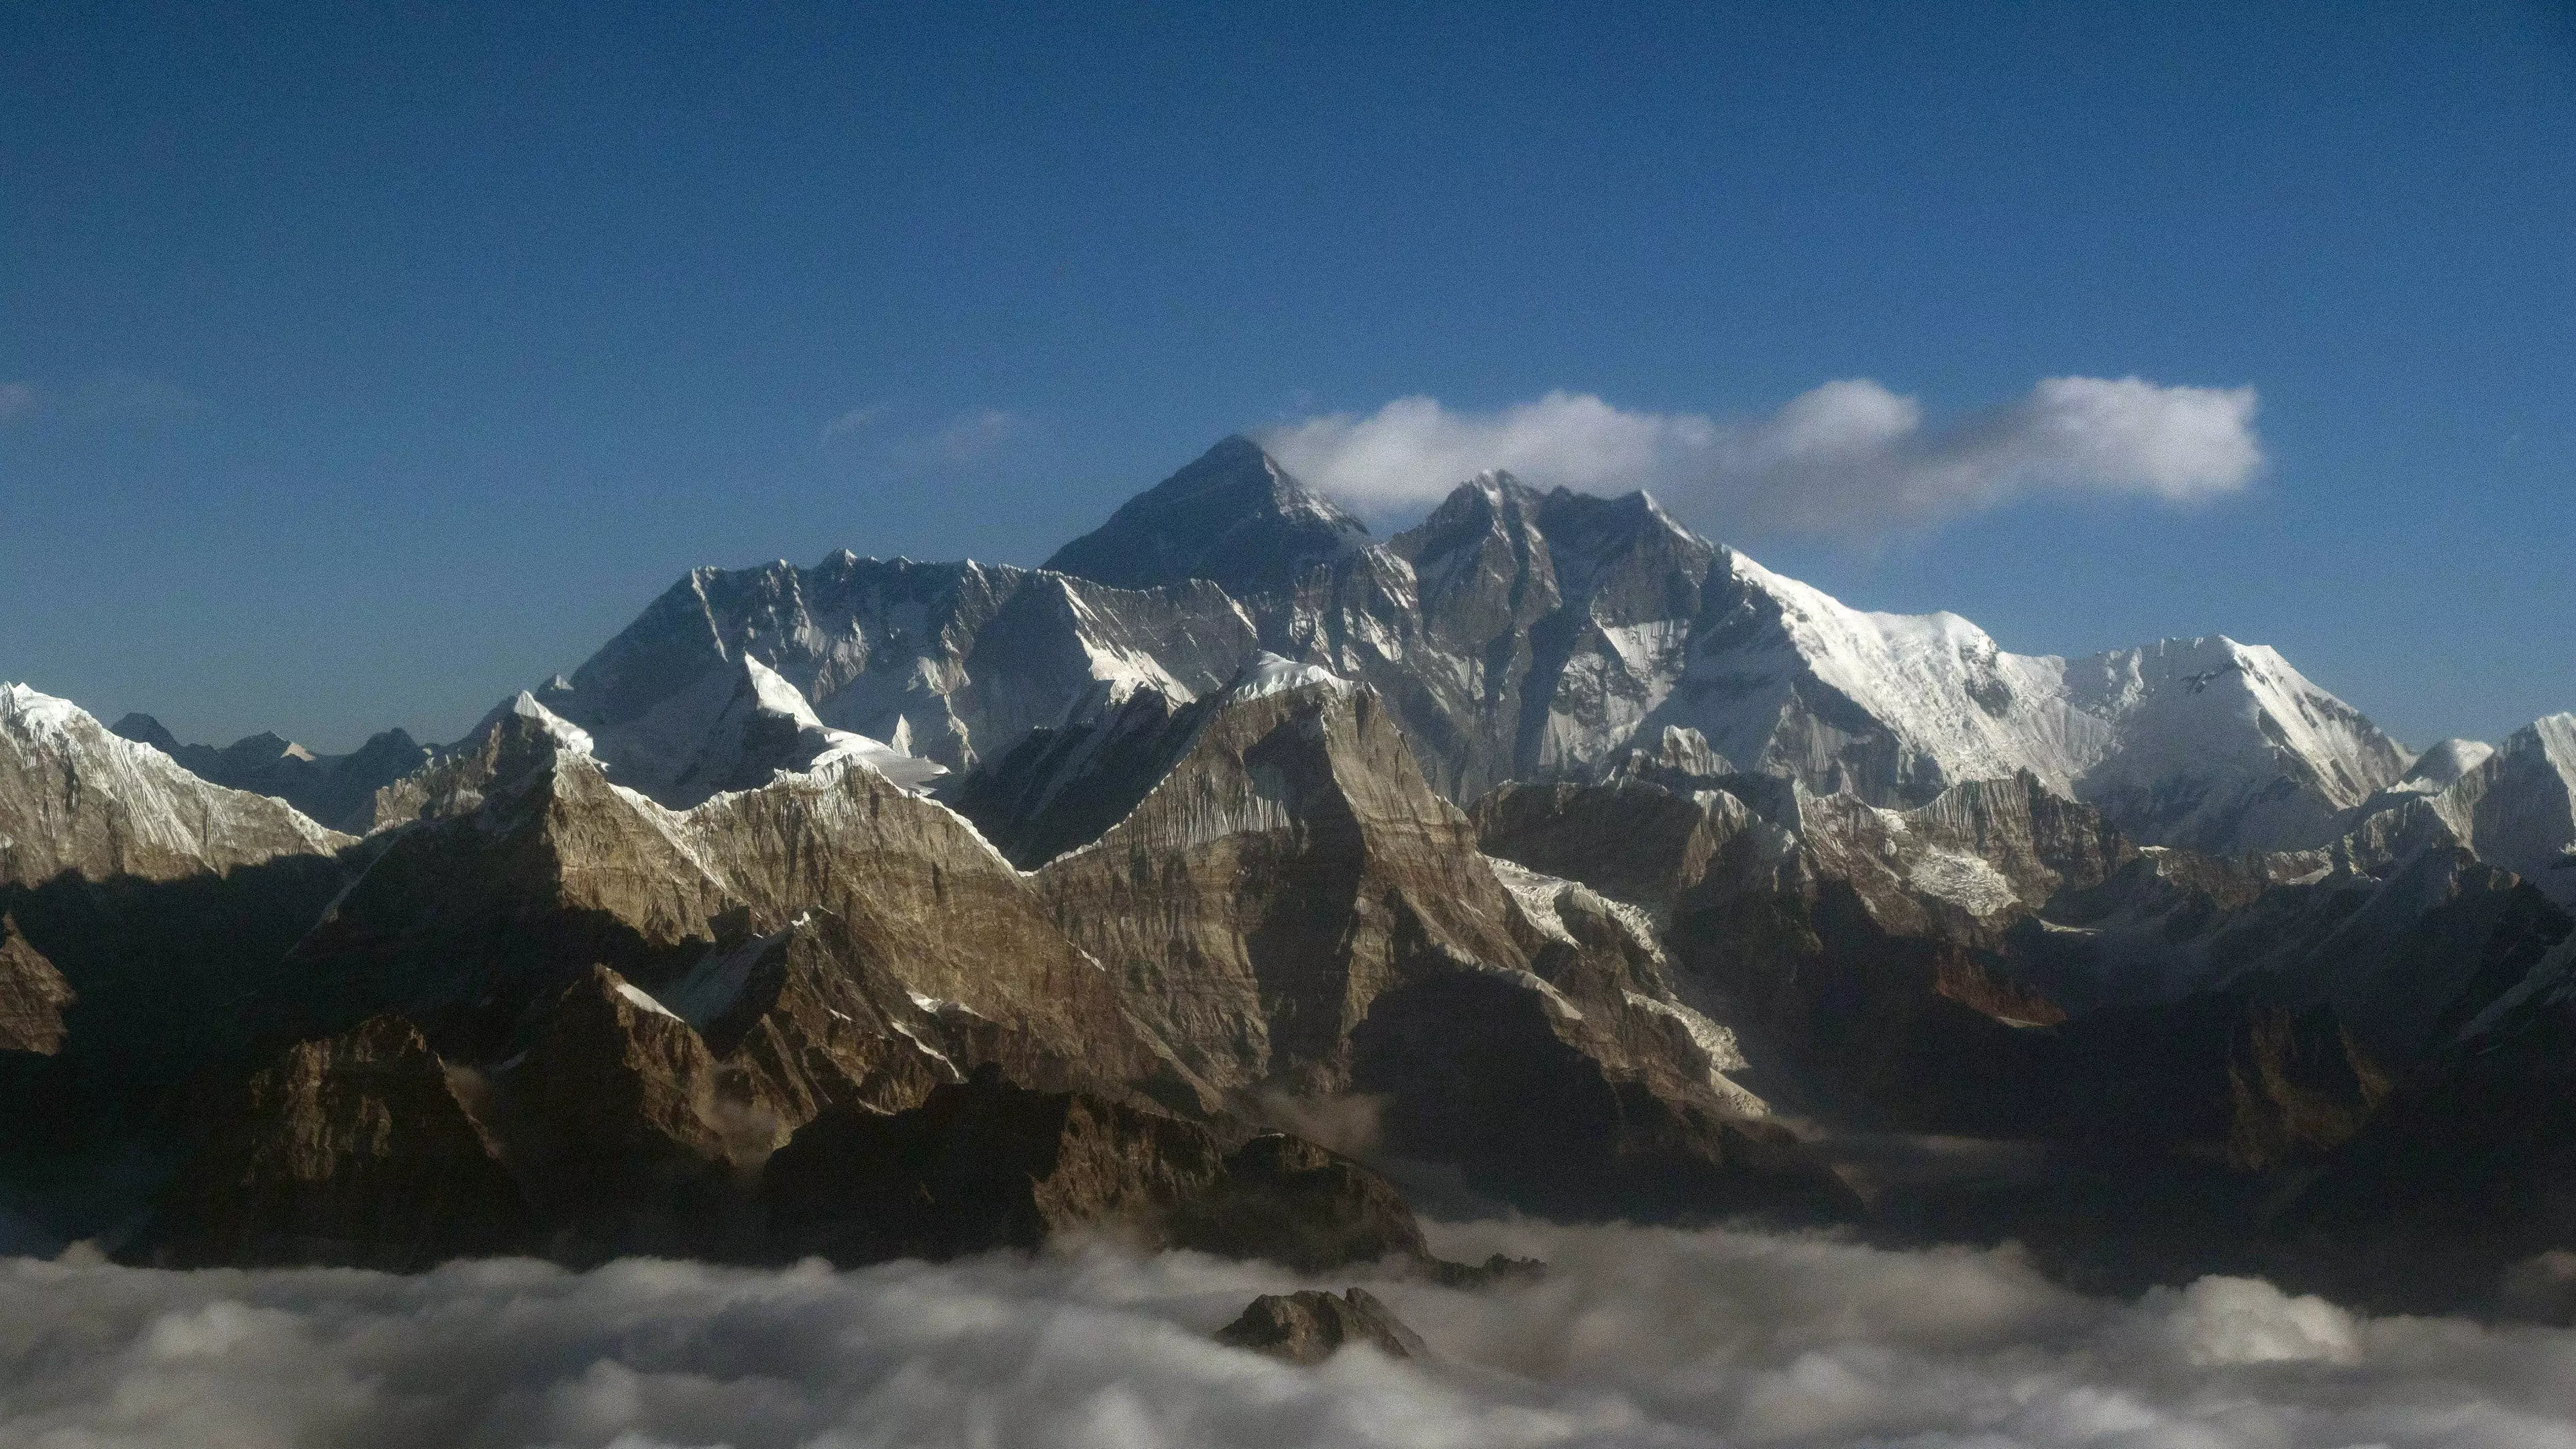 Two Climbers Get Banned From Everest After Lying About Reaching Summit